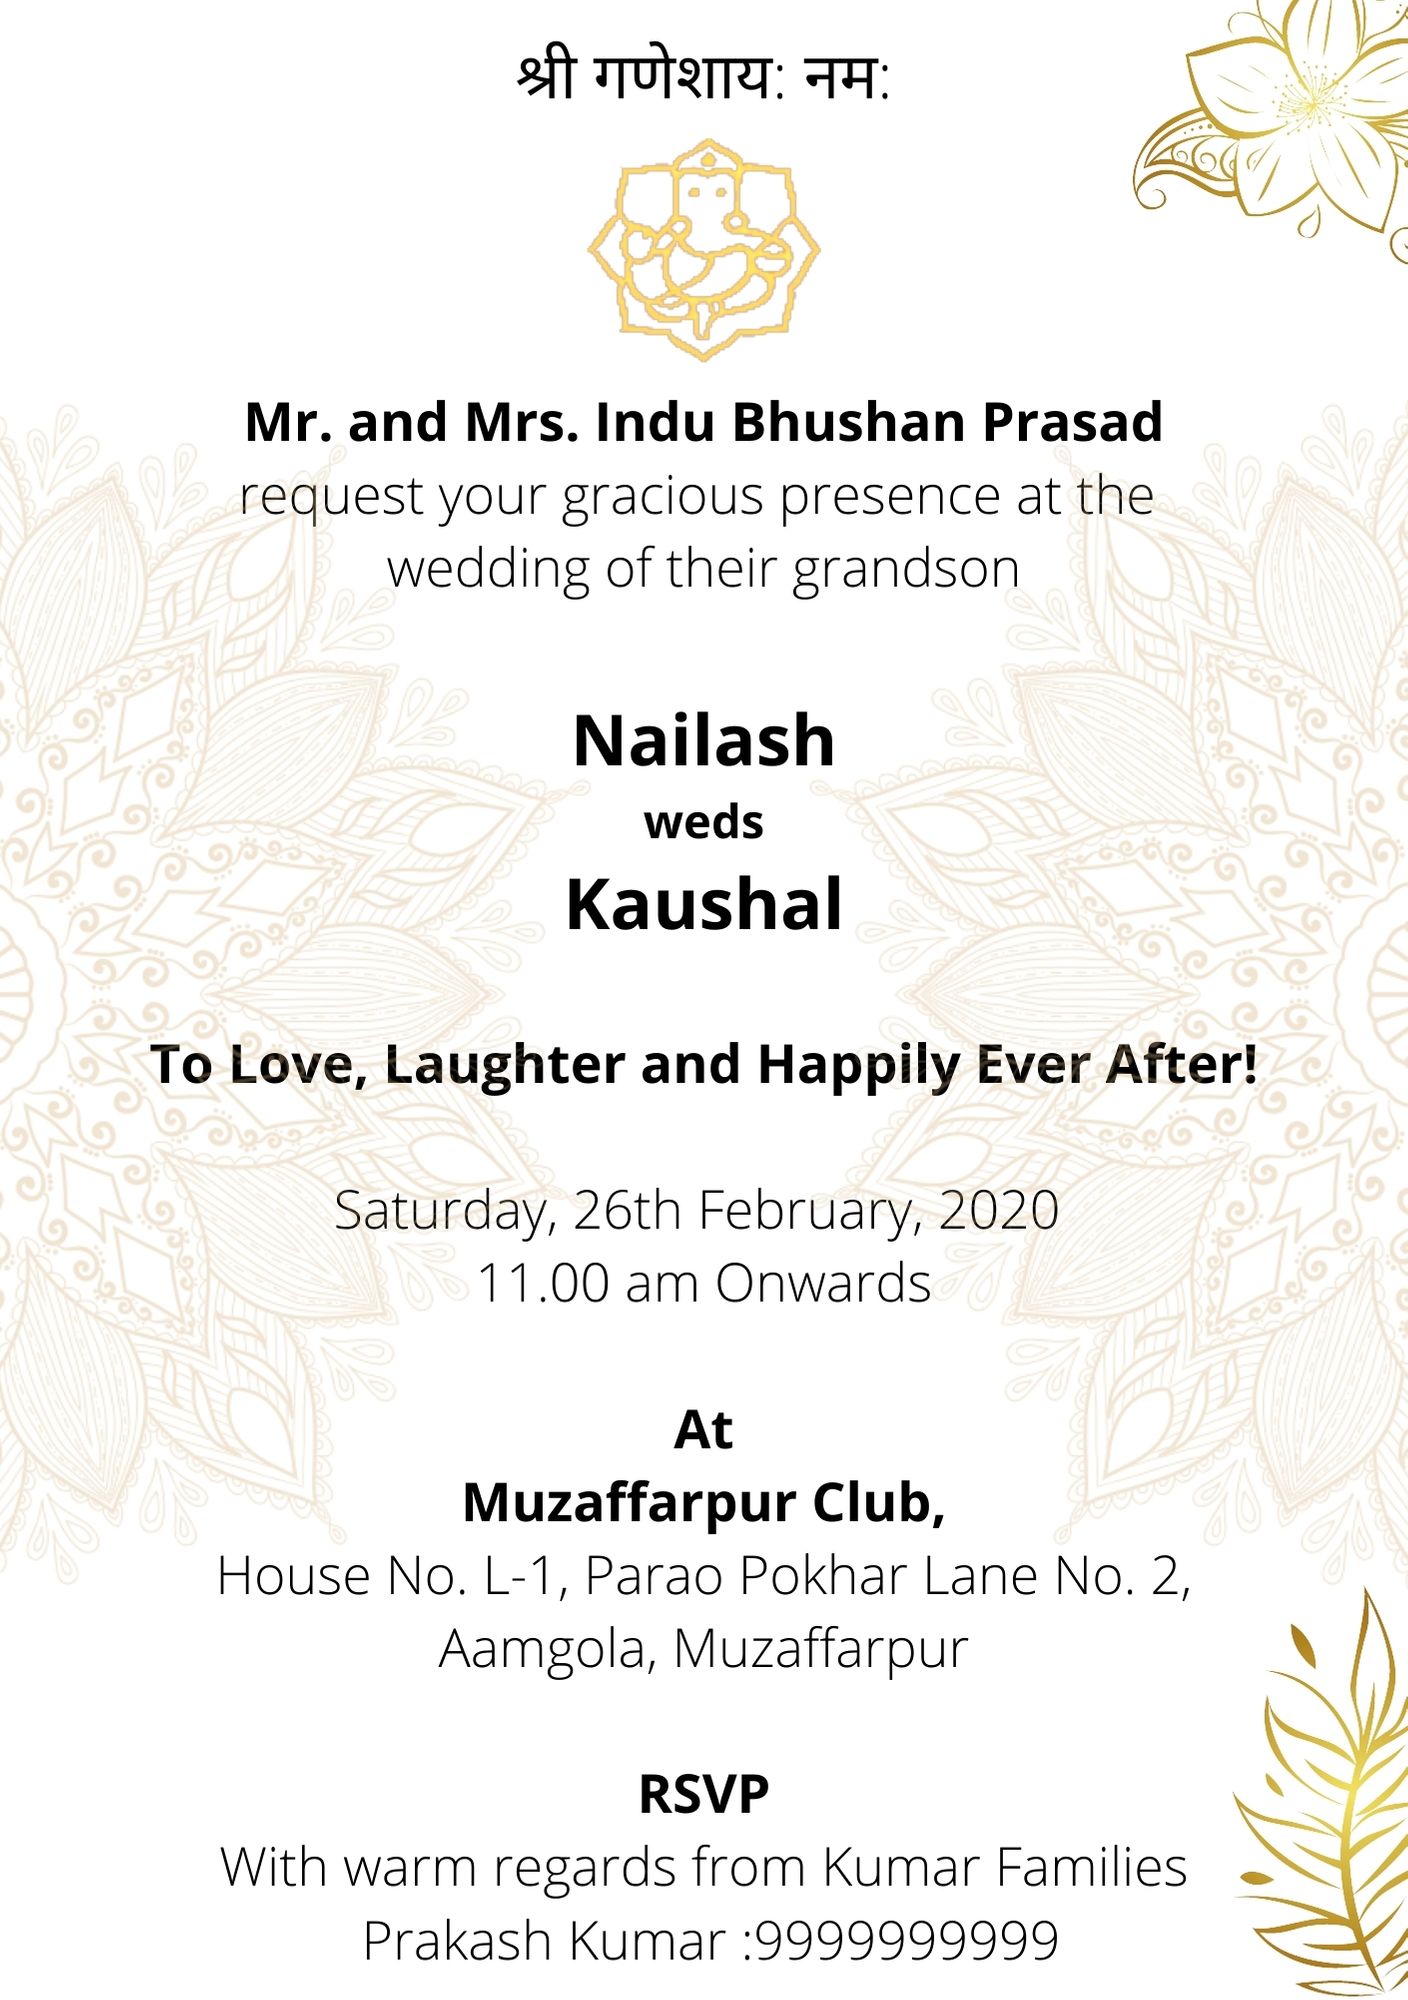 Islamic Engagement Invitation Template | PosterMyWall